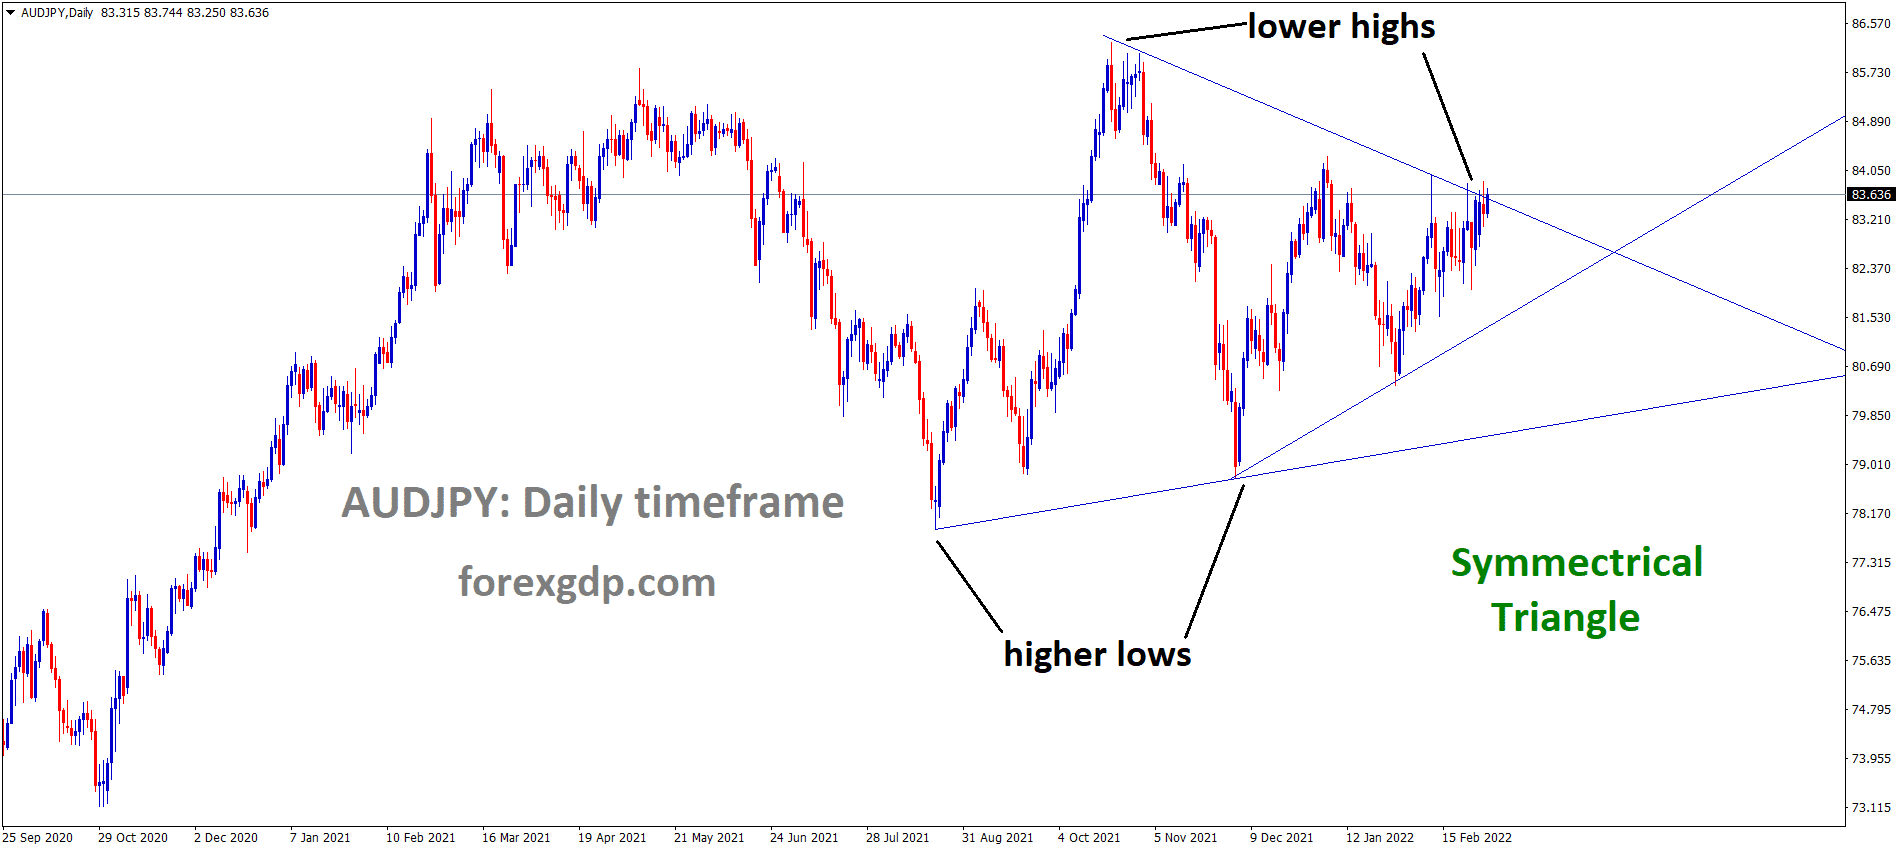 AUDJPY is moving in the Symmetrical triangle pattern and the market has reached the Top area of the pattern.